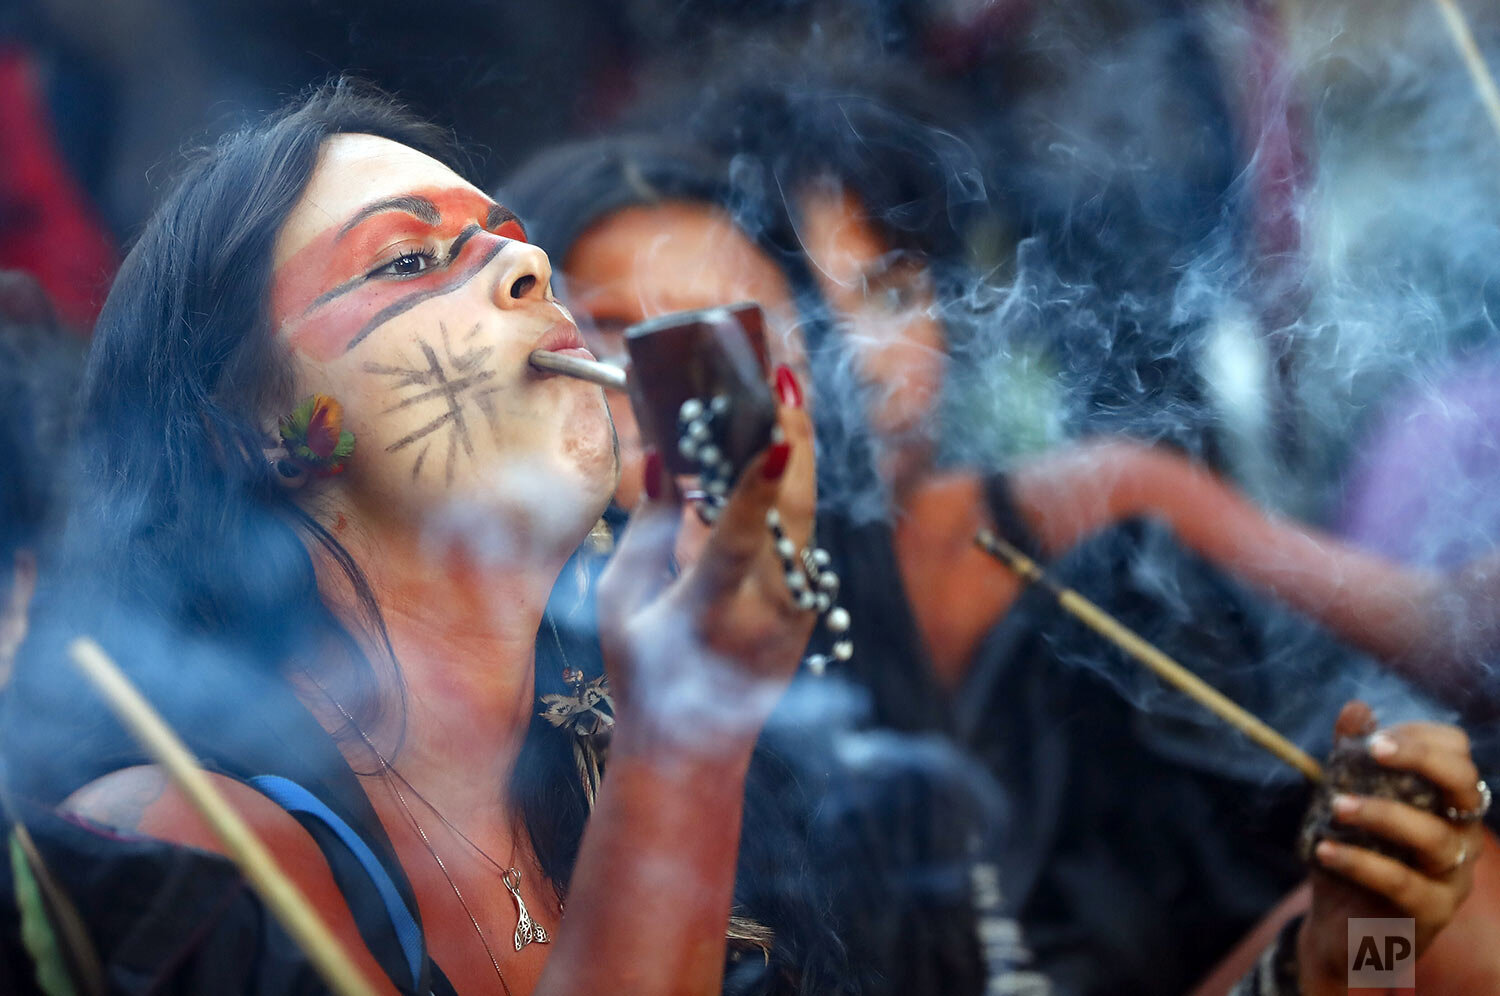  A Guarani Mbya indigenous woman smokes a pipe while waiting for police to enter the property her community has been occupying in an attempt to stop real estate developer Tenda from constructing apartment buildings next to their land in Sao Paulo, Br